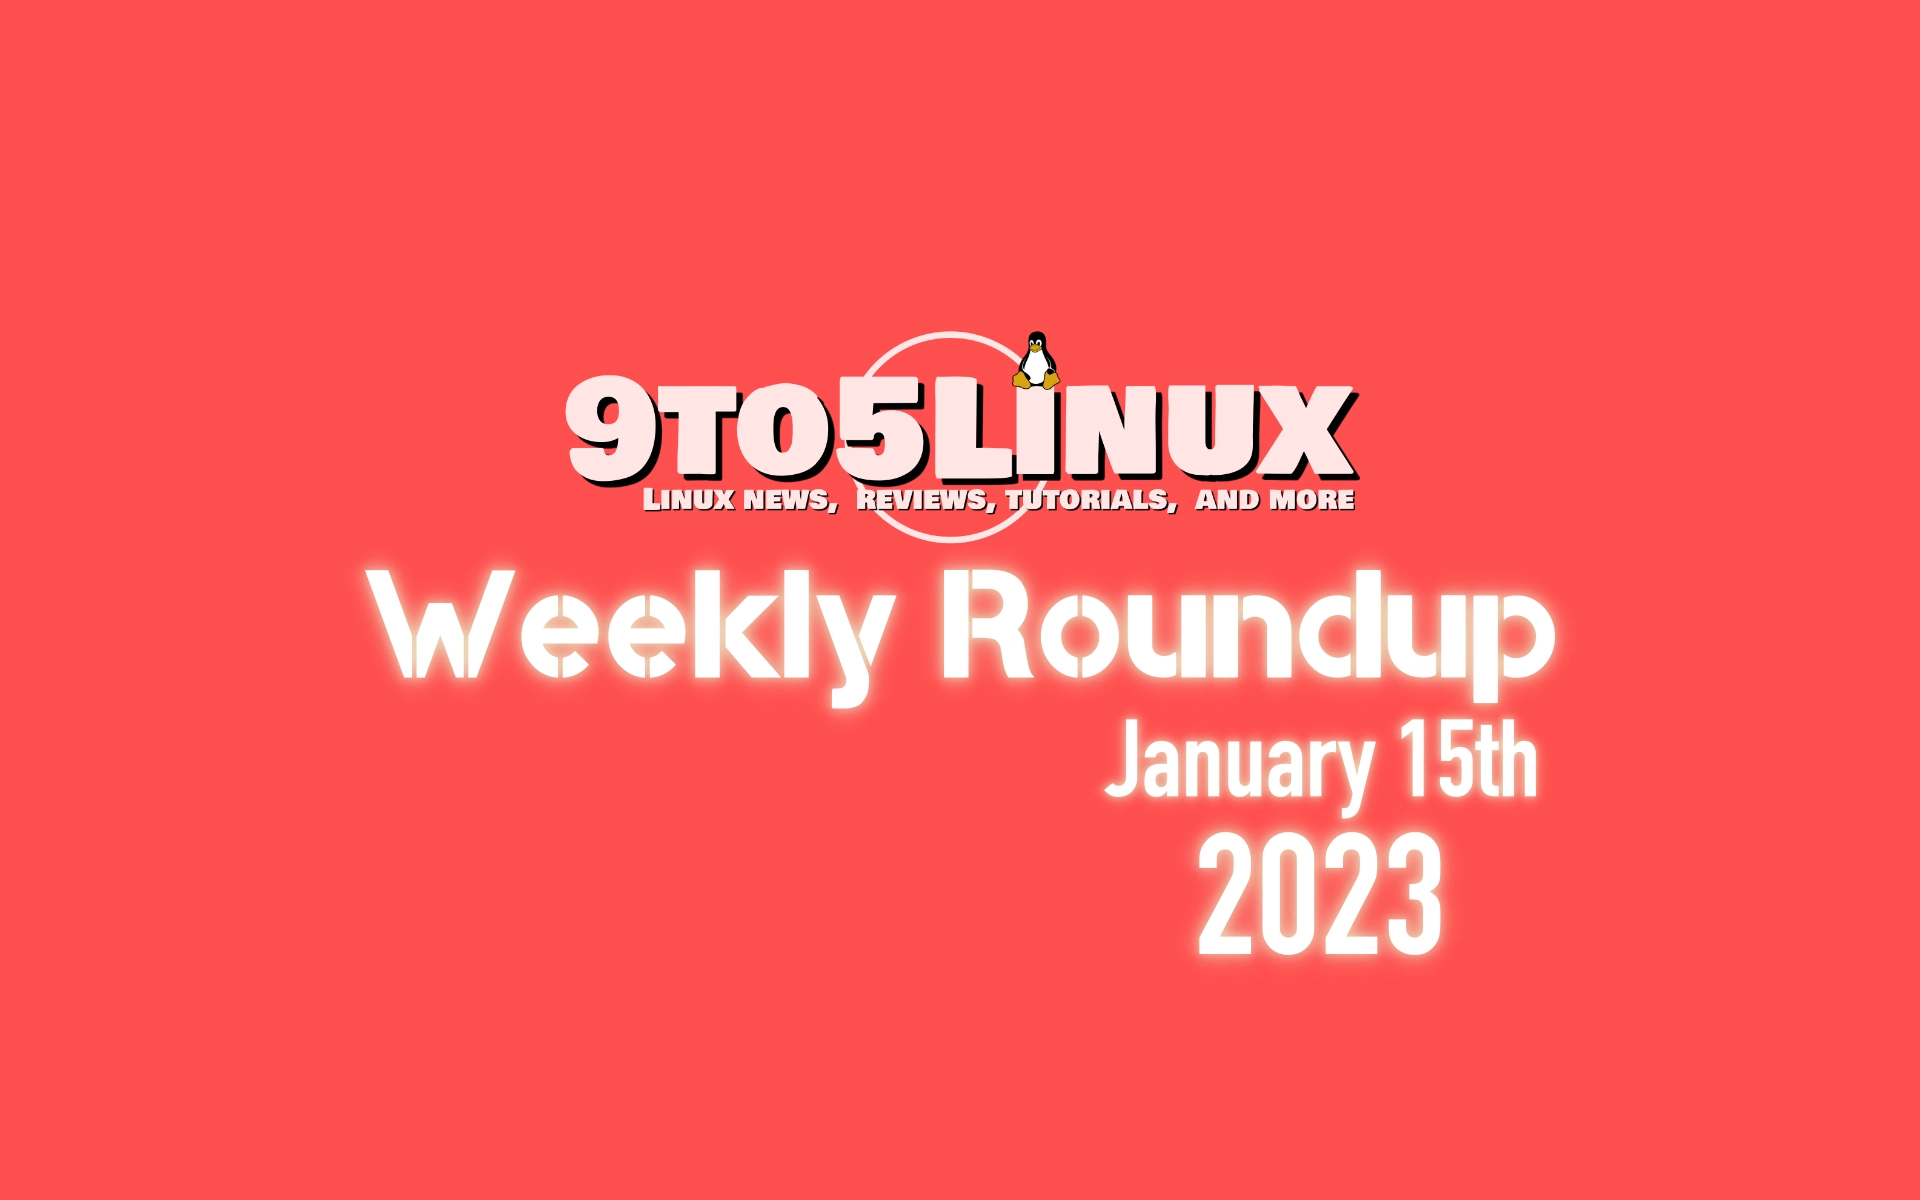 9to5Linux Weekly Roundup: January 15th, 2023